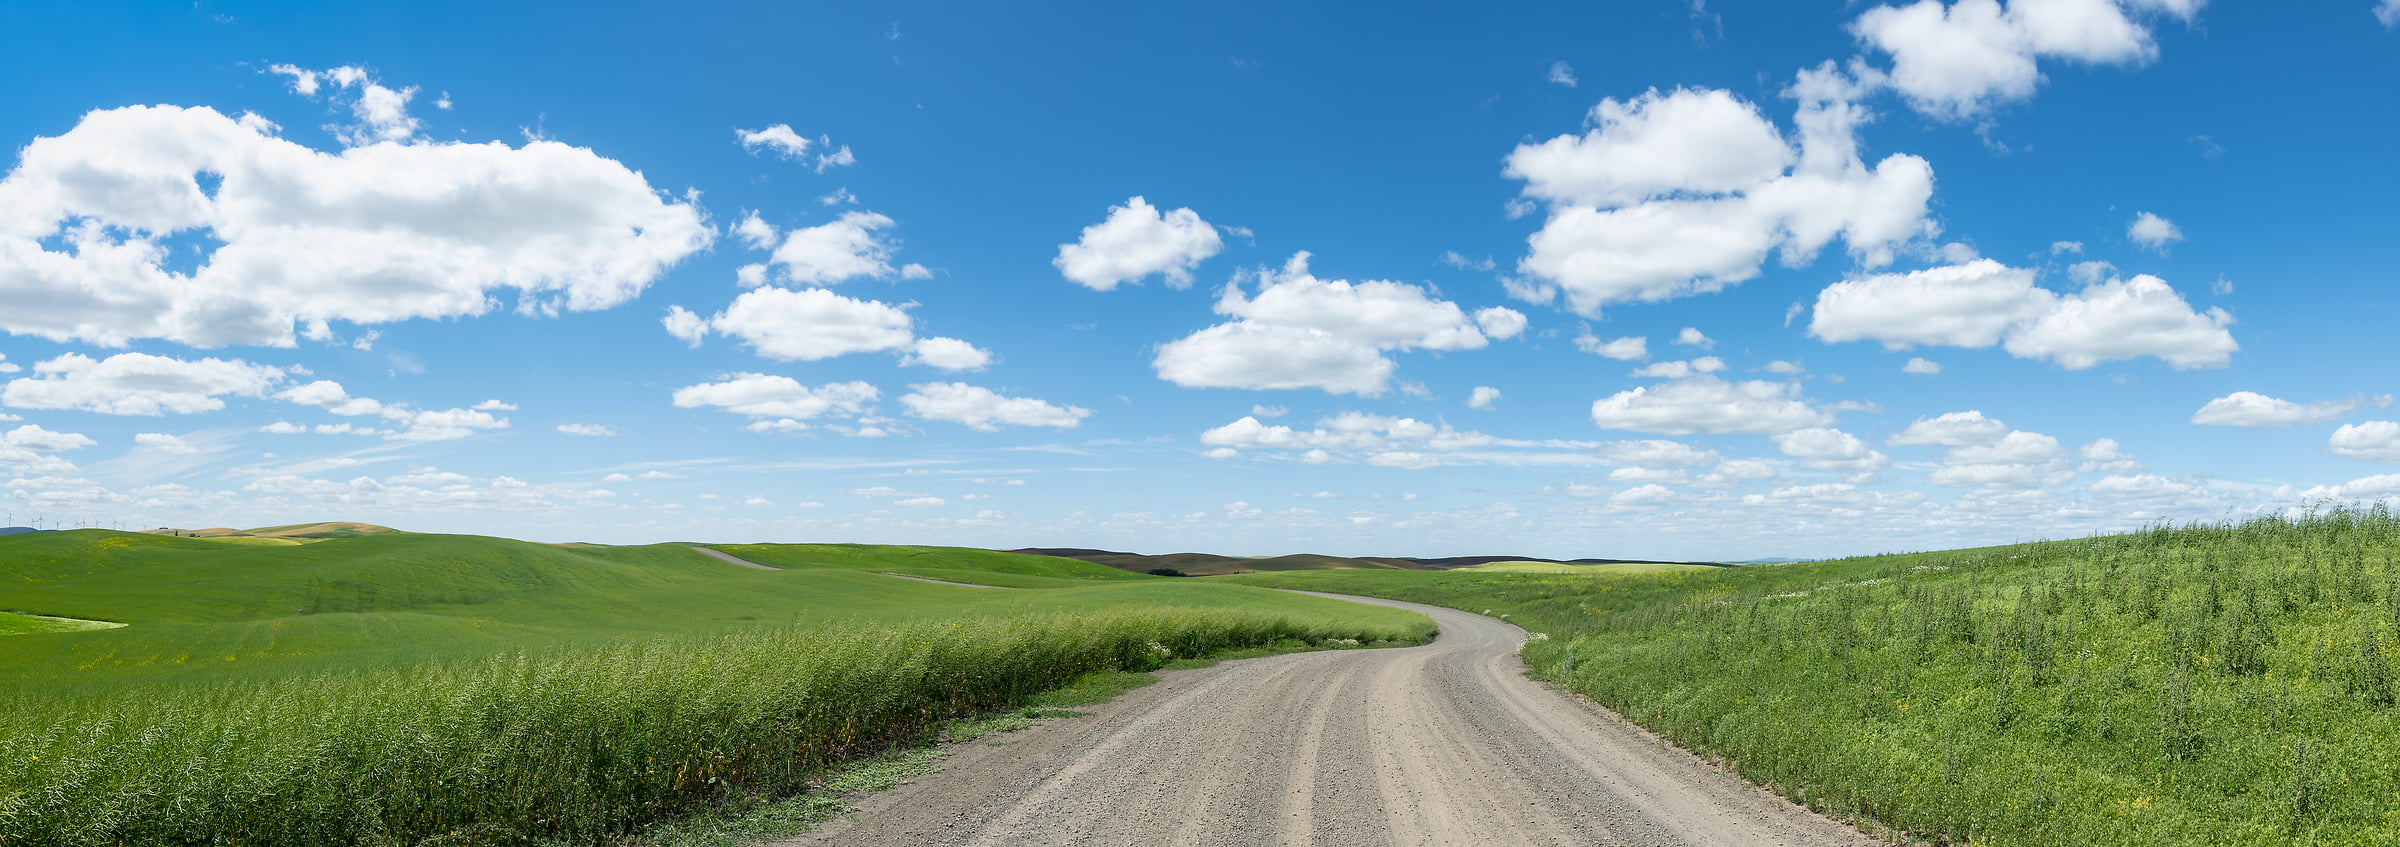 87 megapixels! A very high resolution, large-format VAST photo print of a road in farmland; landscape photograph created by Greg Probst in Palouse, Washington.